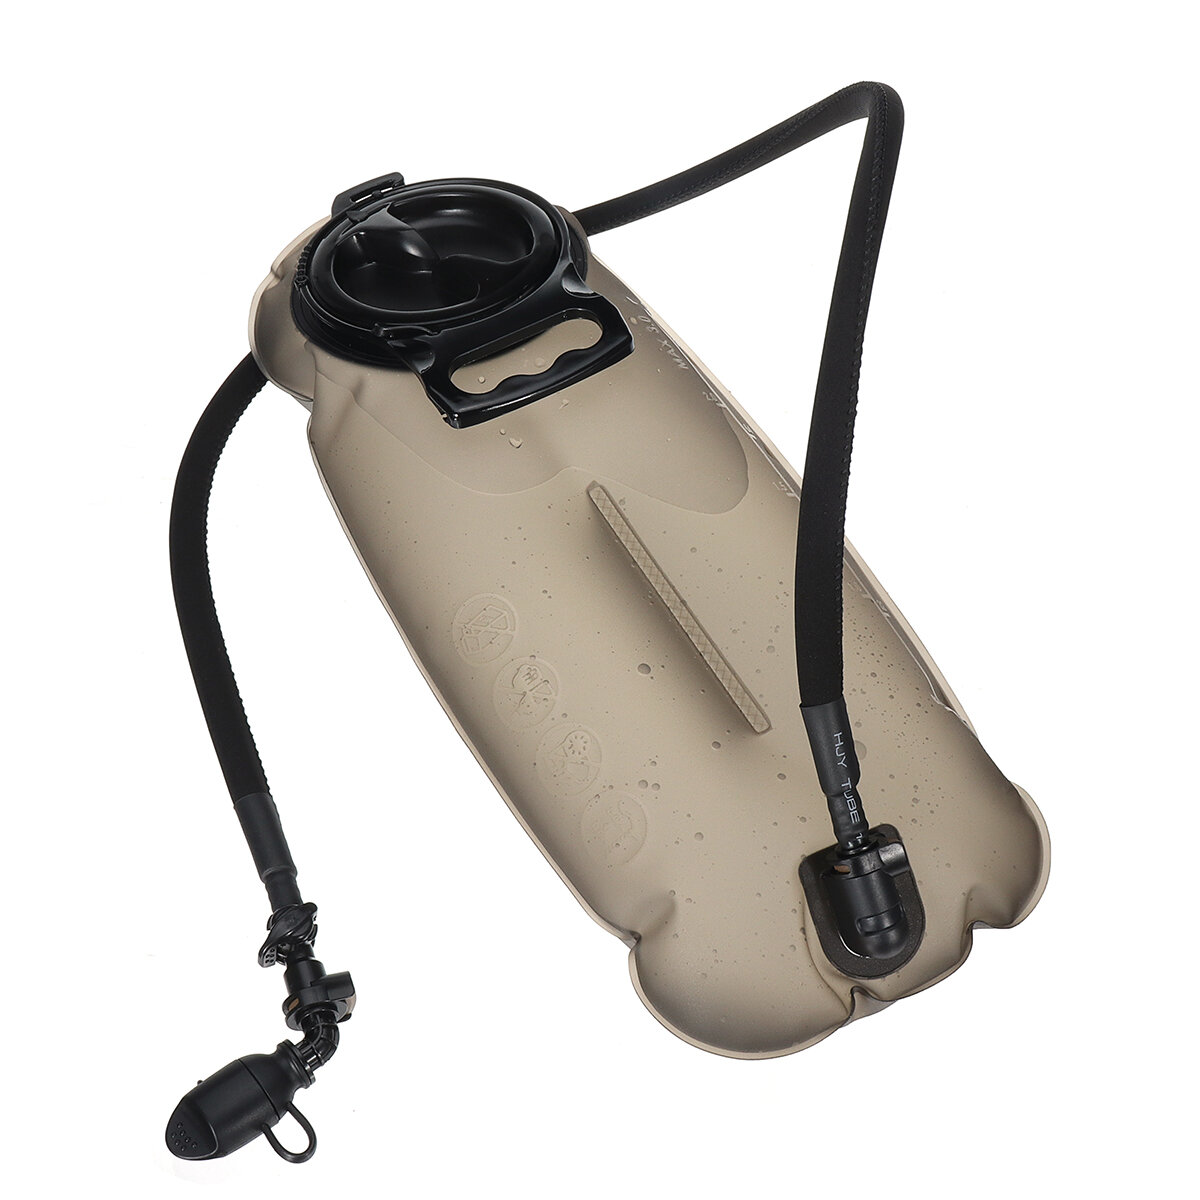 Military Outdoor 2L 2.5L 3L TPU Water Bag Bladder Sport Climbing Hydration System Hiking Survival Pouch Backpack Free Sh